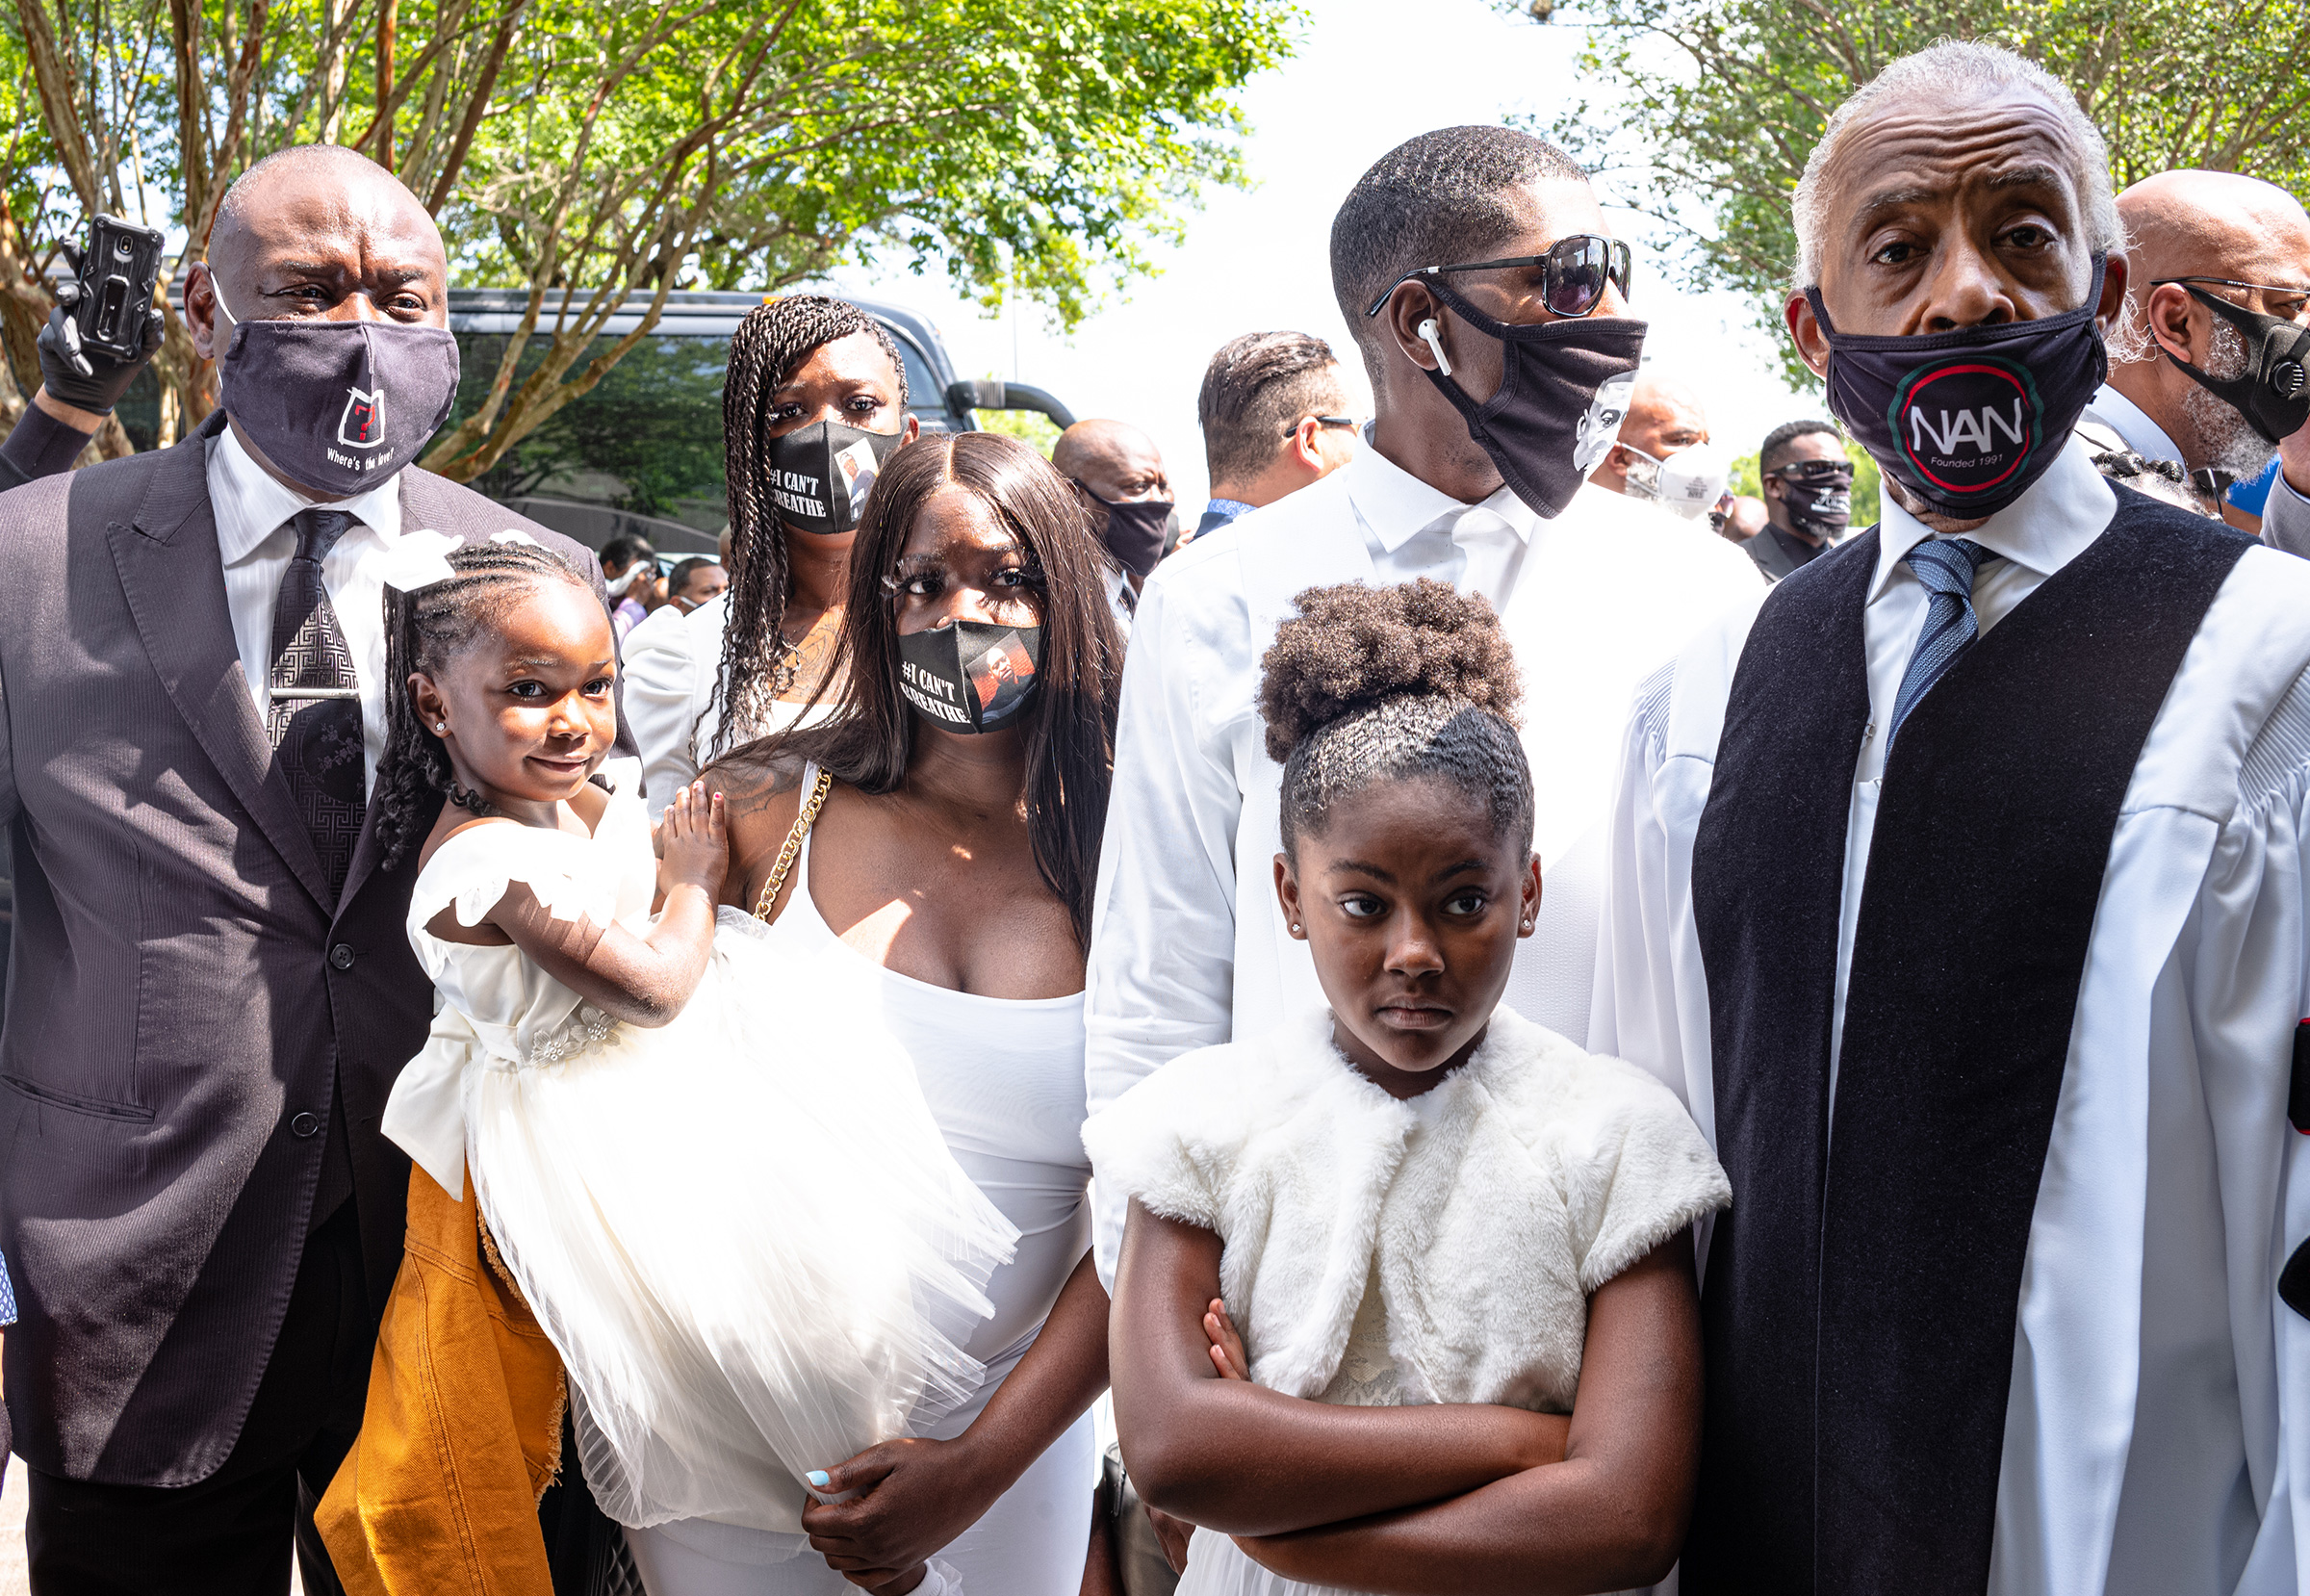 The family’s lawyer, Ben Crump, far left; Floyd’s son Quincy Mason, second from right, with his daughter in front of him; and the Rev. Al Sharpton, right, waiting for the private funeral on June 9. (Ruddy Roye for TIME)